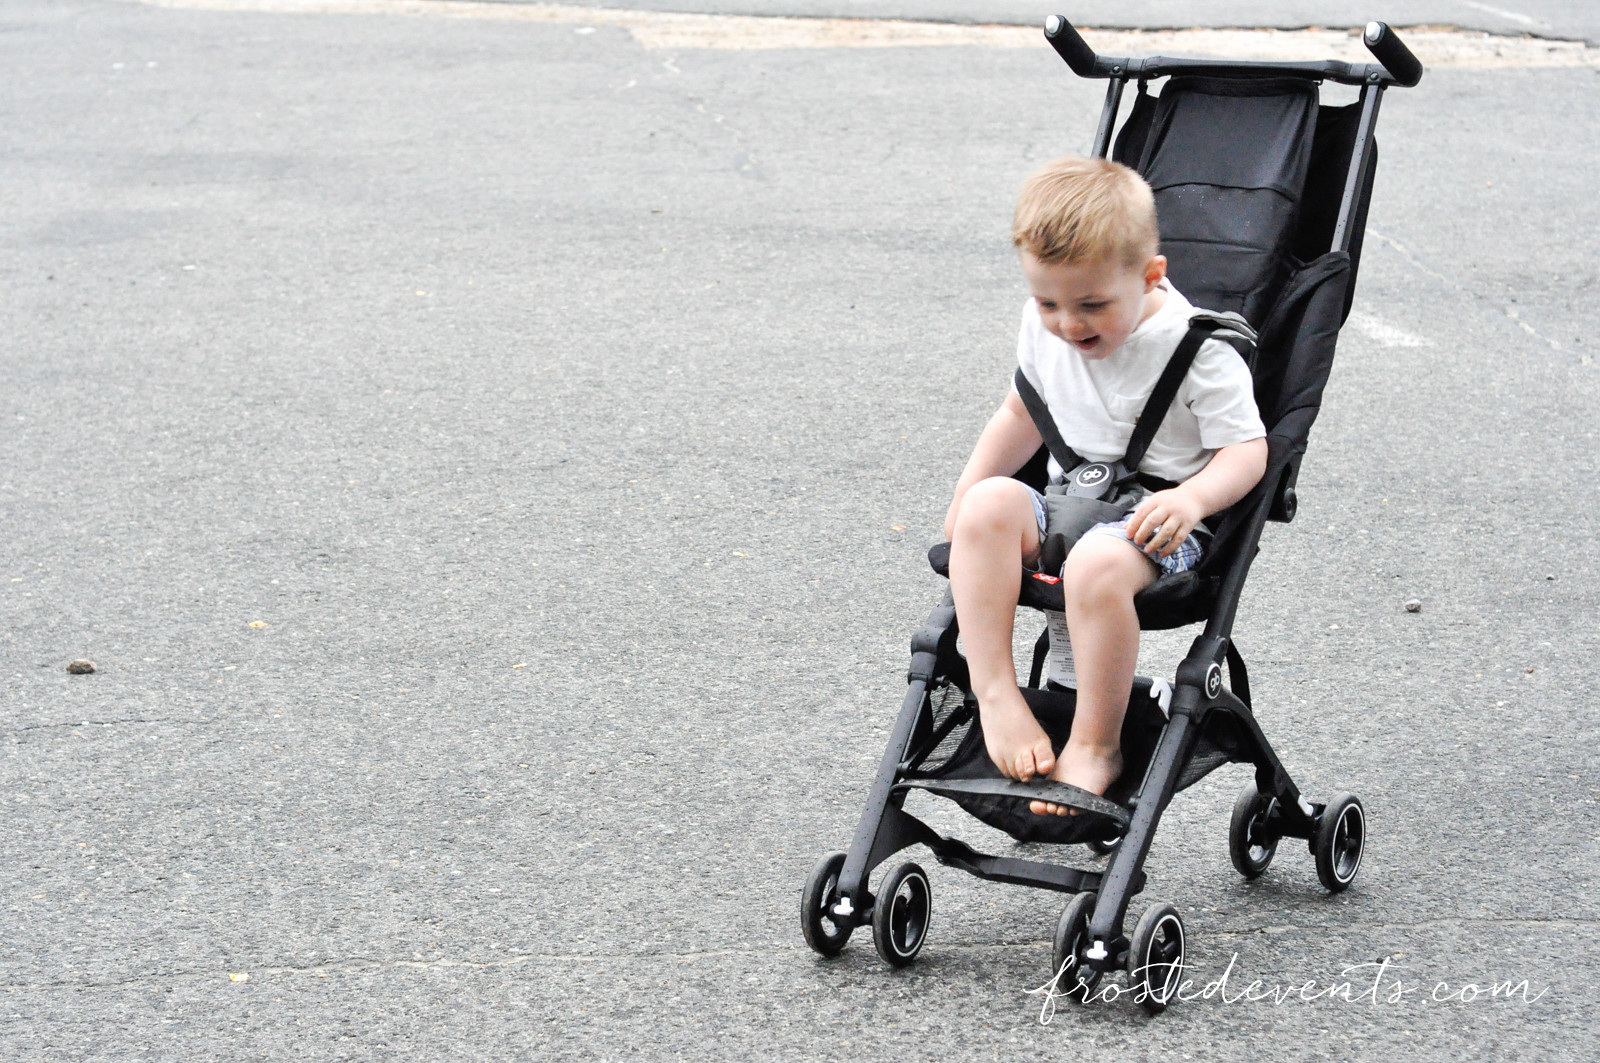 gb Pockit Stroller Fits in a Shoulder Bag Perfect for Family Travel 